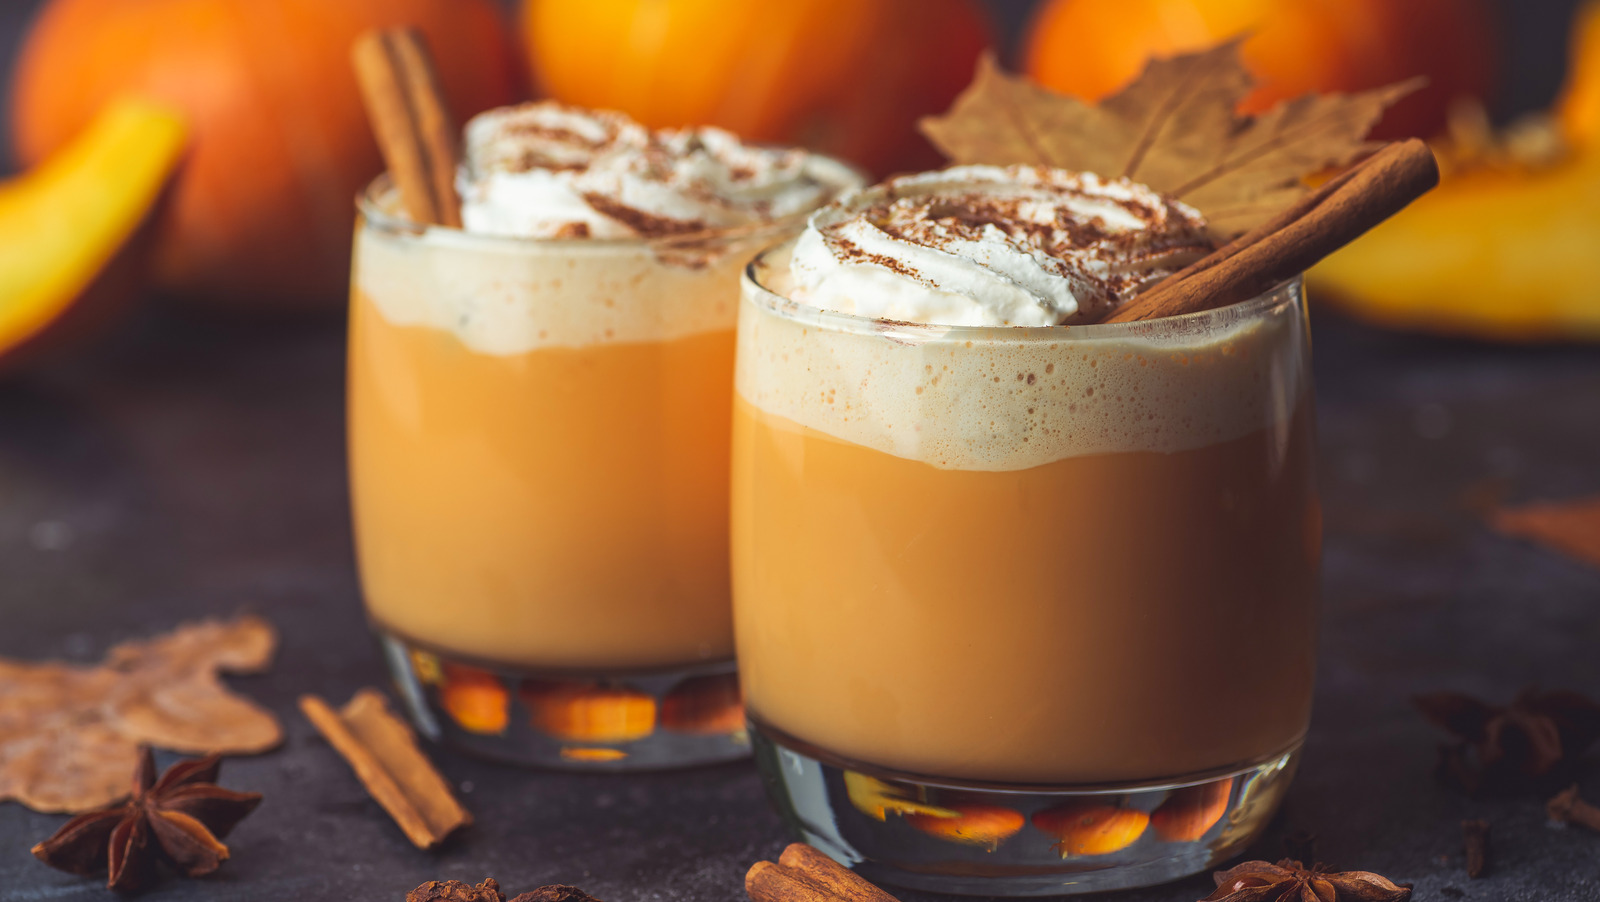 Are Pumpkin Spice Lattes Bad For You?